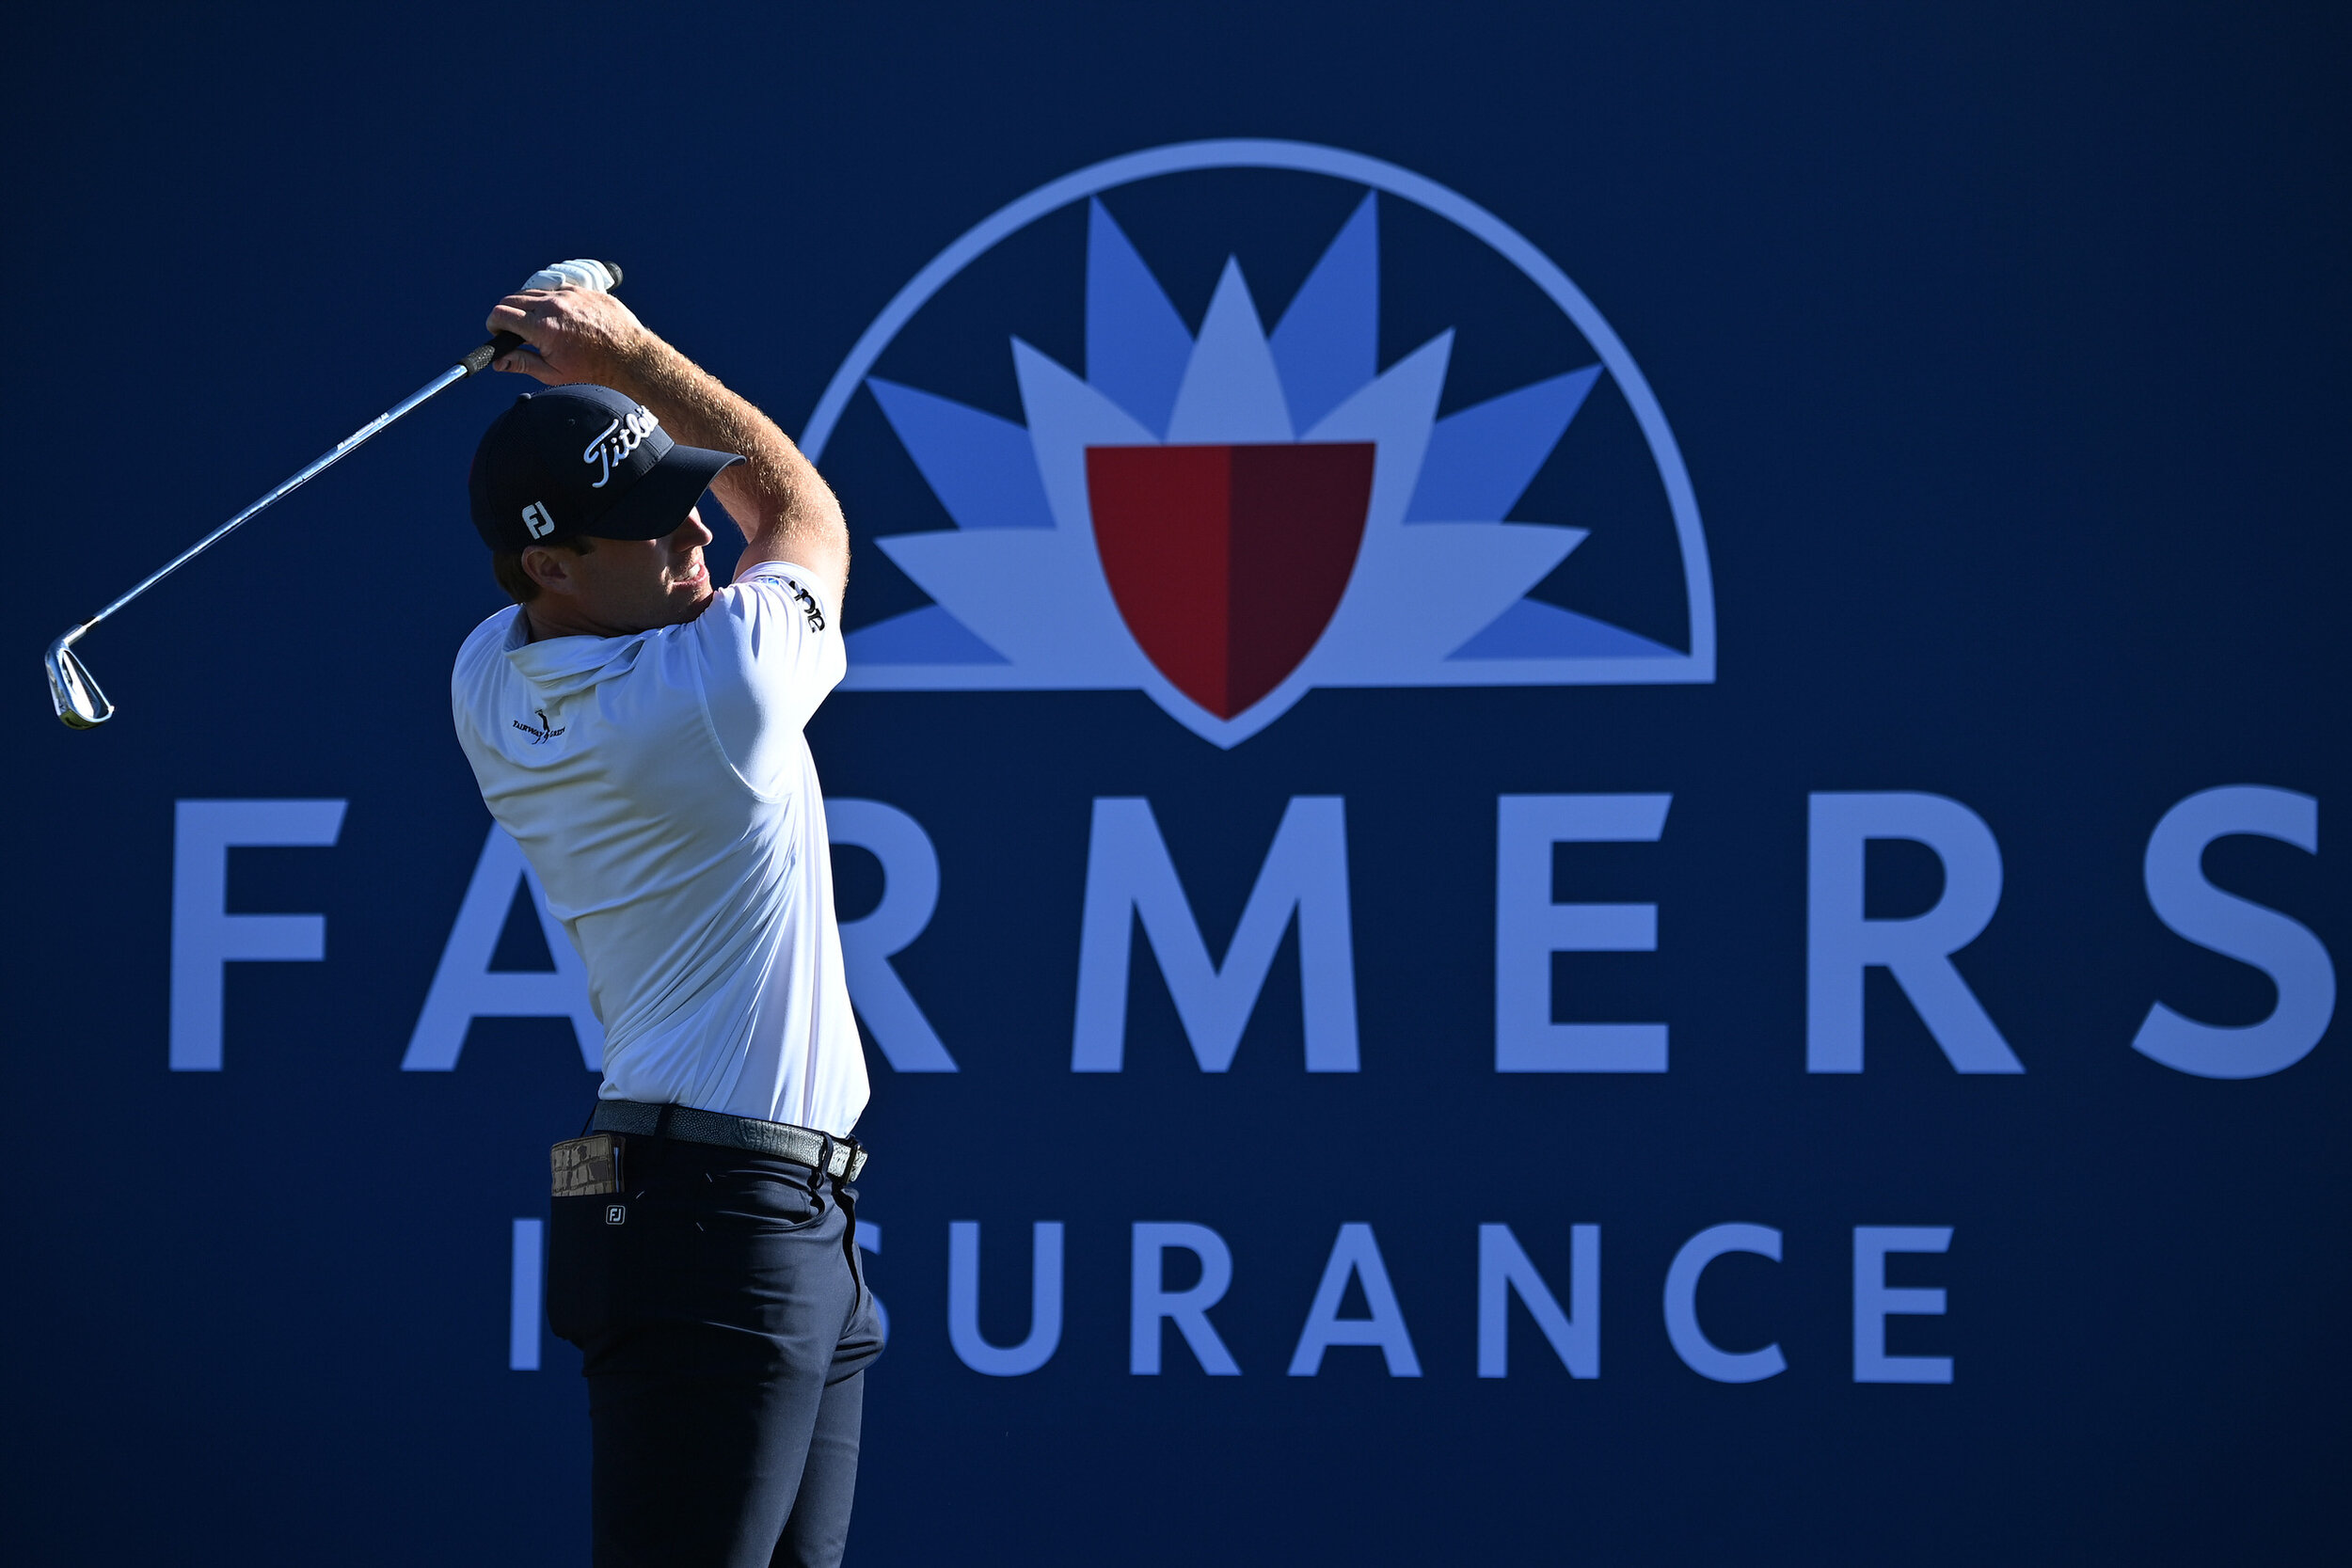  SAN DIEGO, CALIFORNIA - JANUARY 30: Robby Shelton hits his tee shot on the 16th hole during round three of the Farmers Insurance Open at Torrey Pines South on January 30, 2021 in San Diego, California. (Photo by Donald Miralle/Getty Images) 